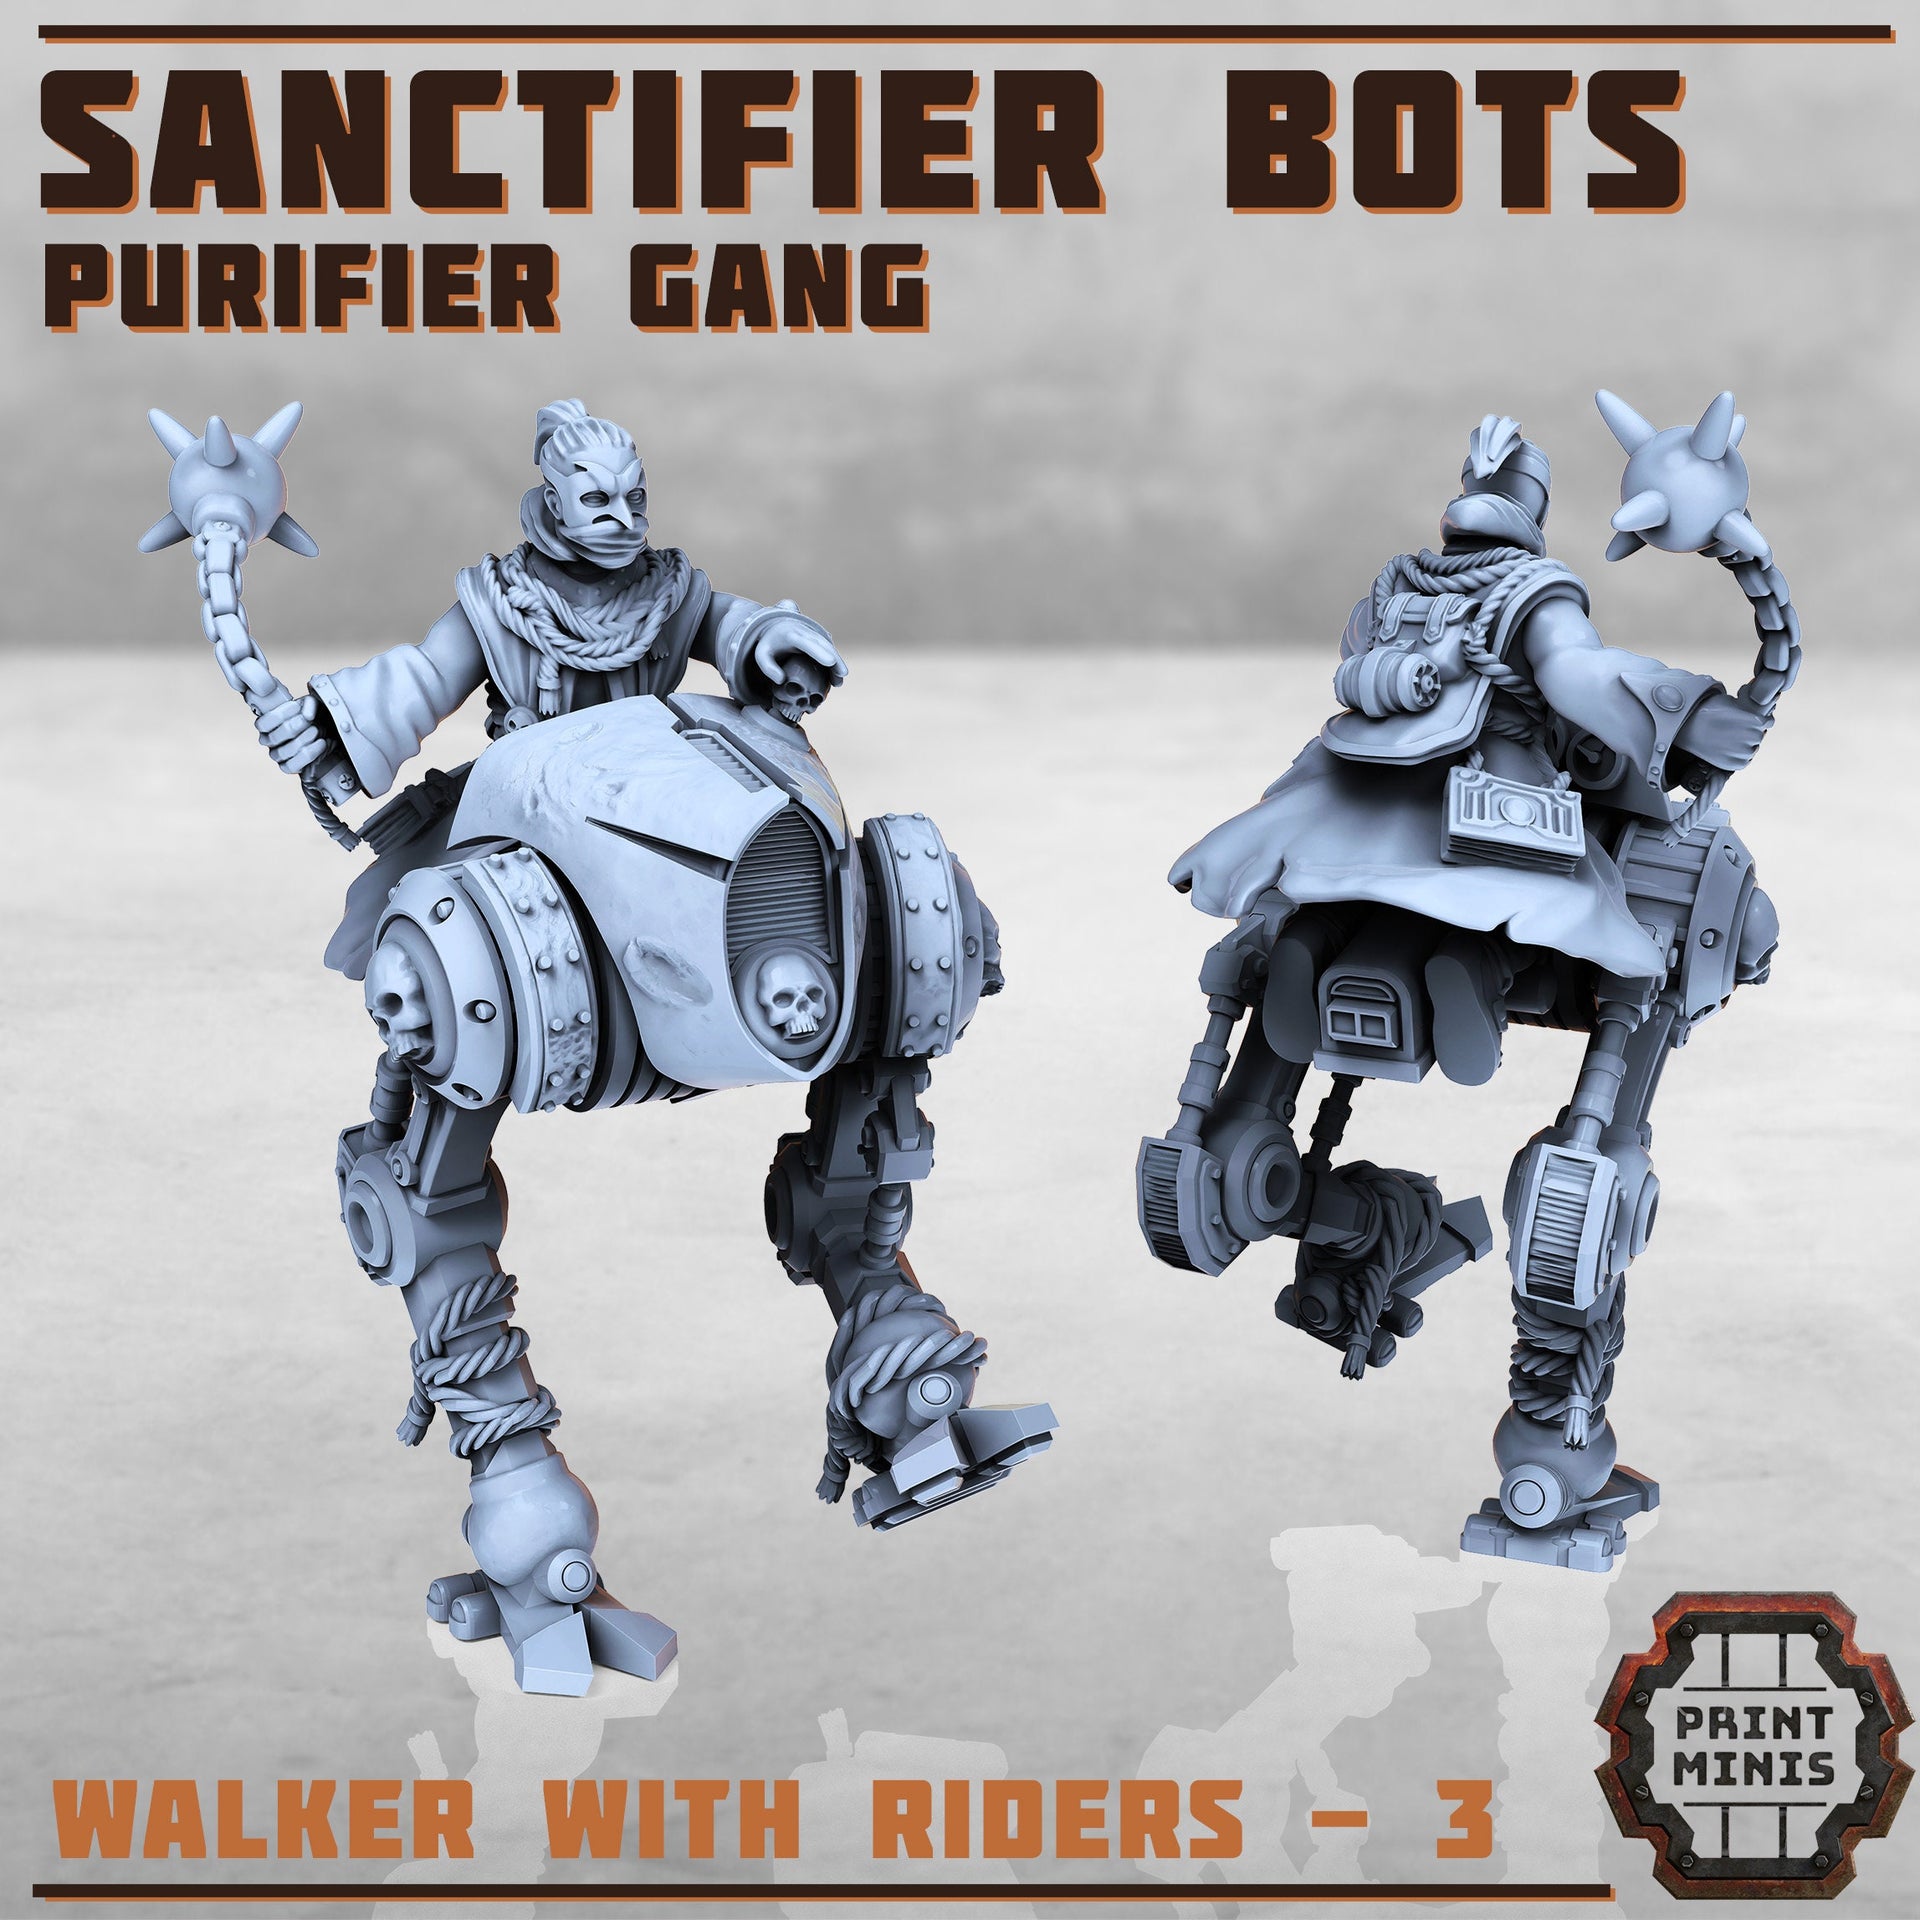 Sanctifier Bot Riders, Scifi Cultists - Print Minis | Sci Fi | Light Infantry | 28mm Heroic | Wasteland | Apocalypse | Imperial | Rogue